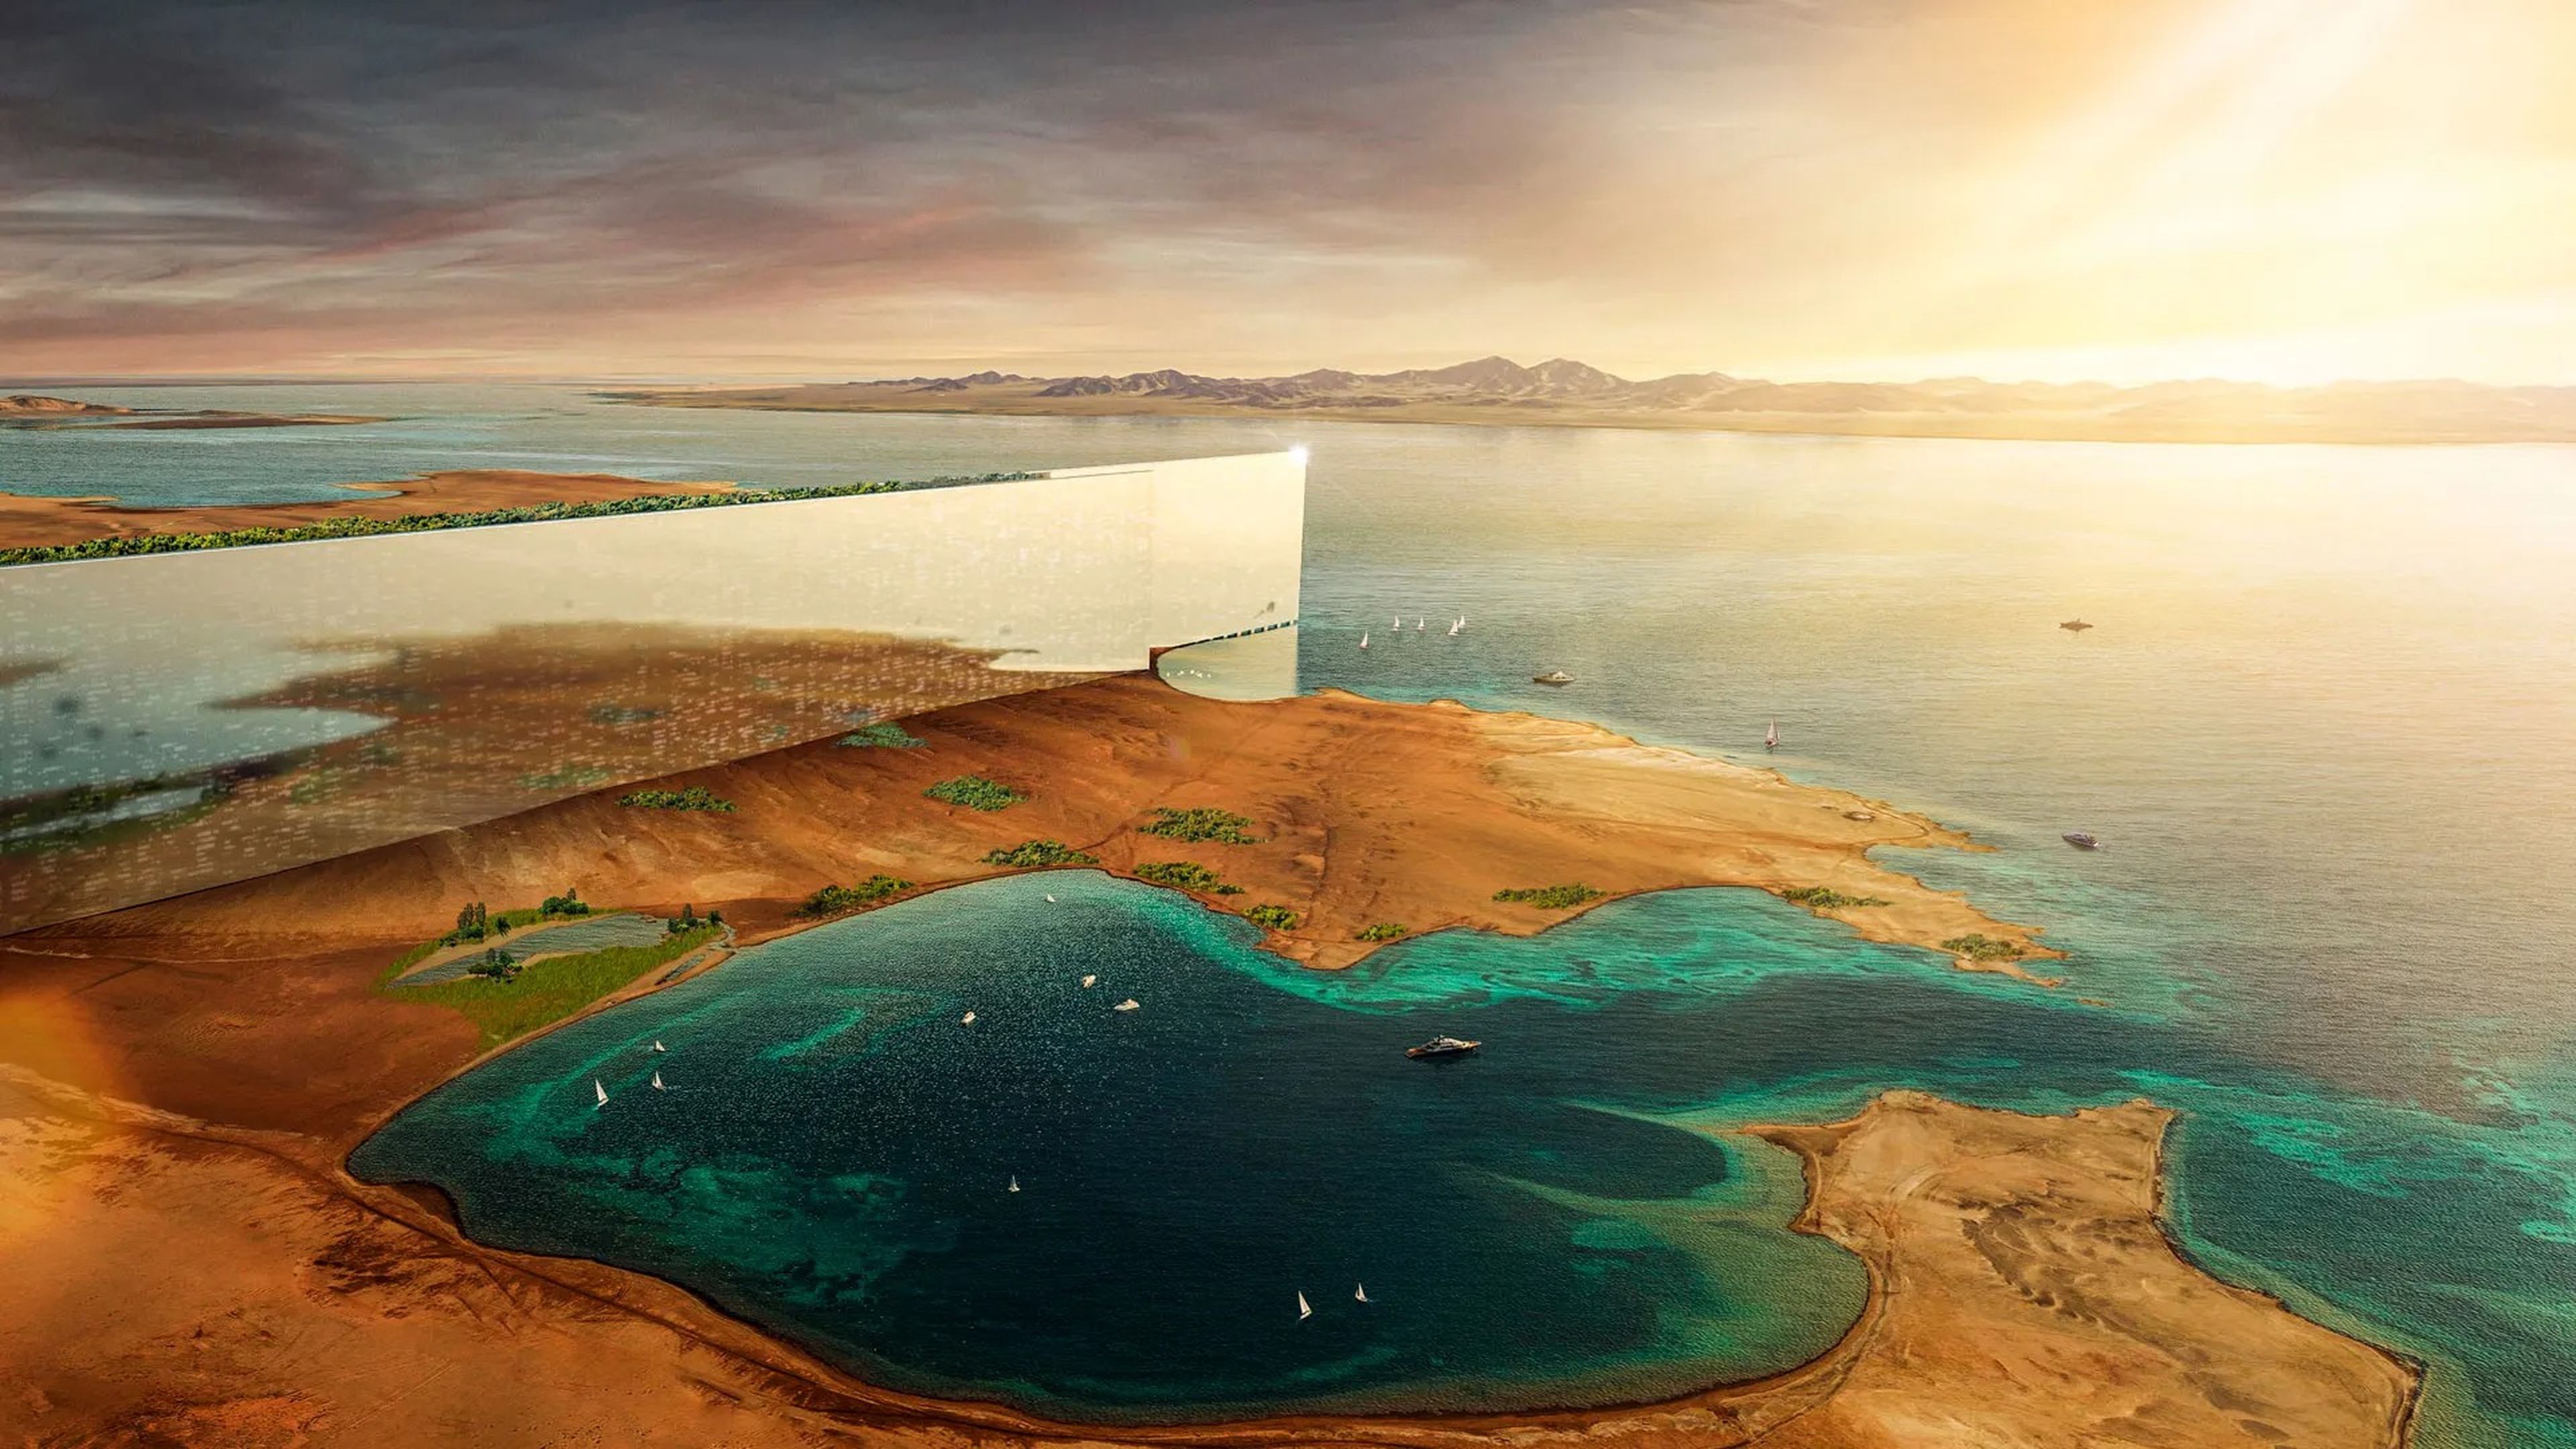 A conceptual image of the planned design for The Line in Saudi Arabia's Neom, shows a large mirrored facade extending out into the water from the desert.